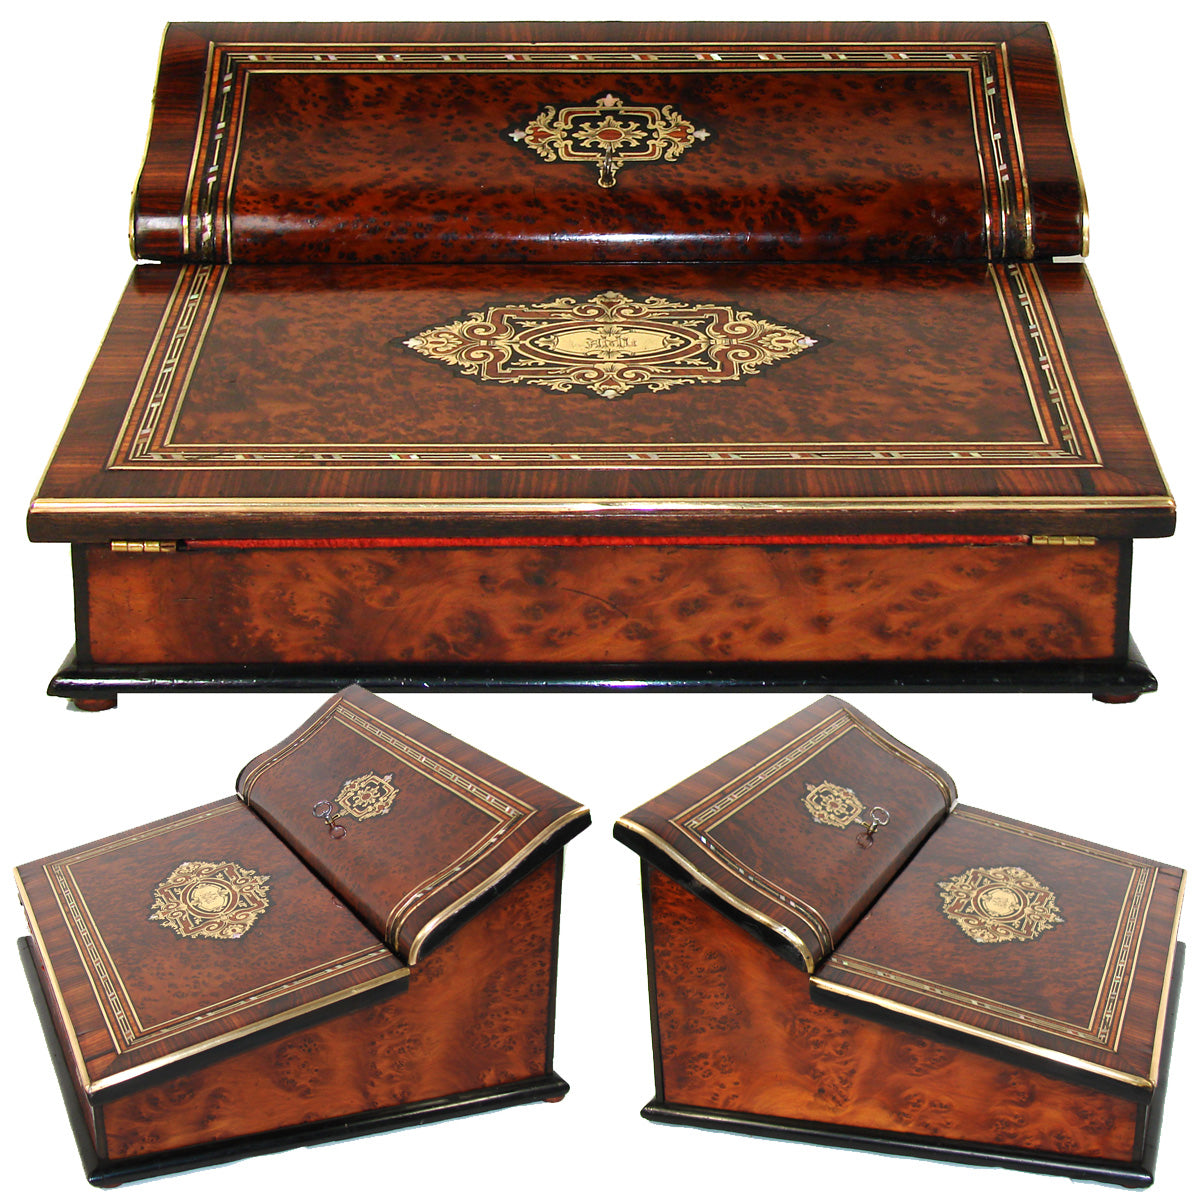 Large 13.5" Wide Antique French Writer's Cabinet, Lap Desk, Ecritoire, Burled Veneers & Boulle Style Inlay